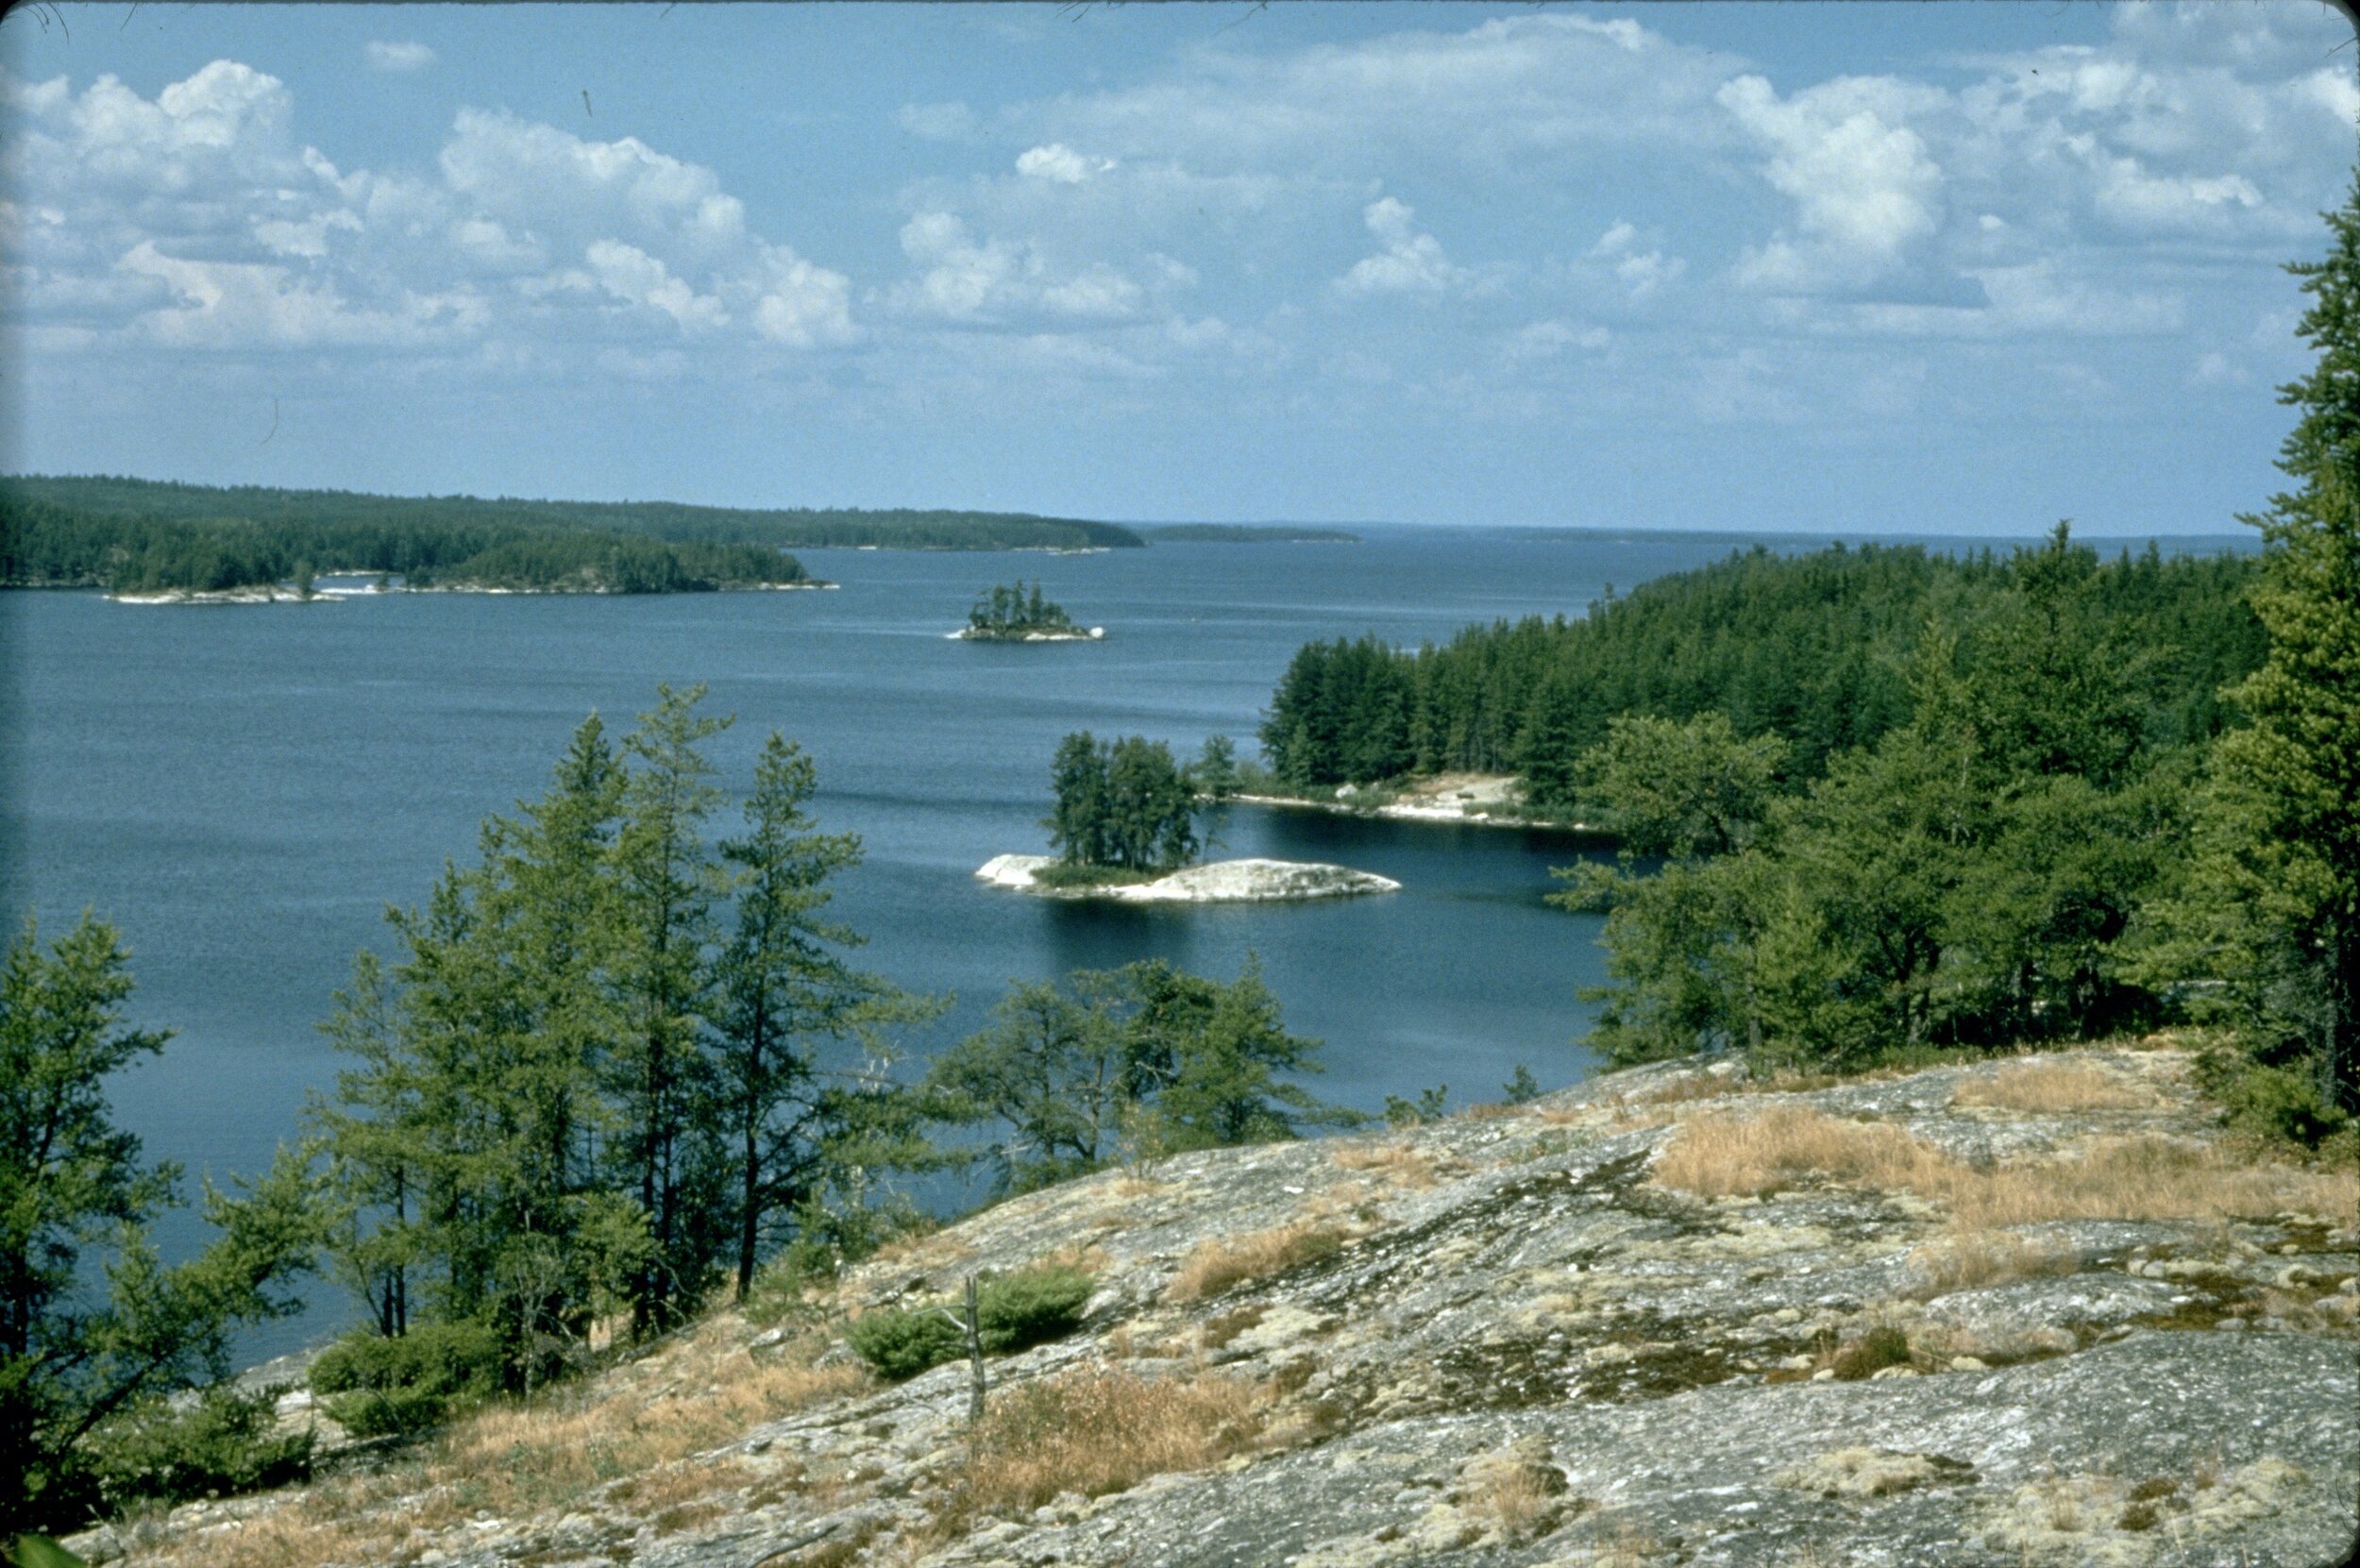 Voyageurs is primarily a water-based park that is best appreciated by boat.